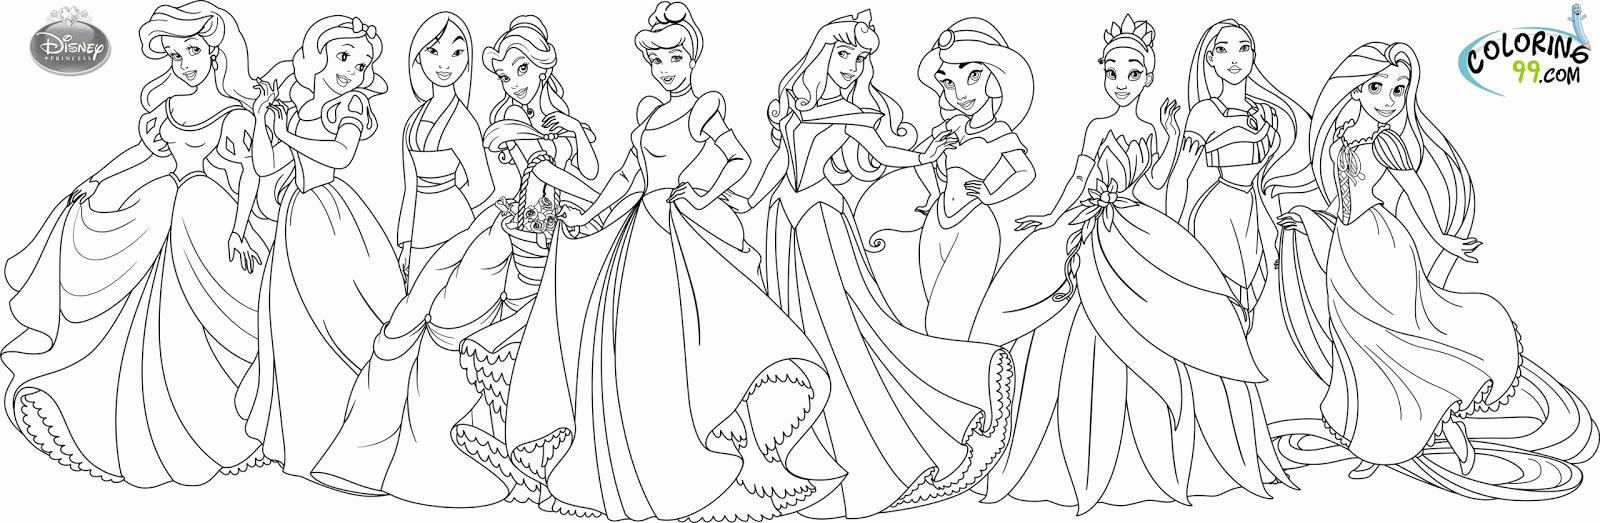 Aurora And Cinderella Coloring Pages | Coloring Pages For All Ages